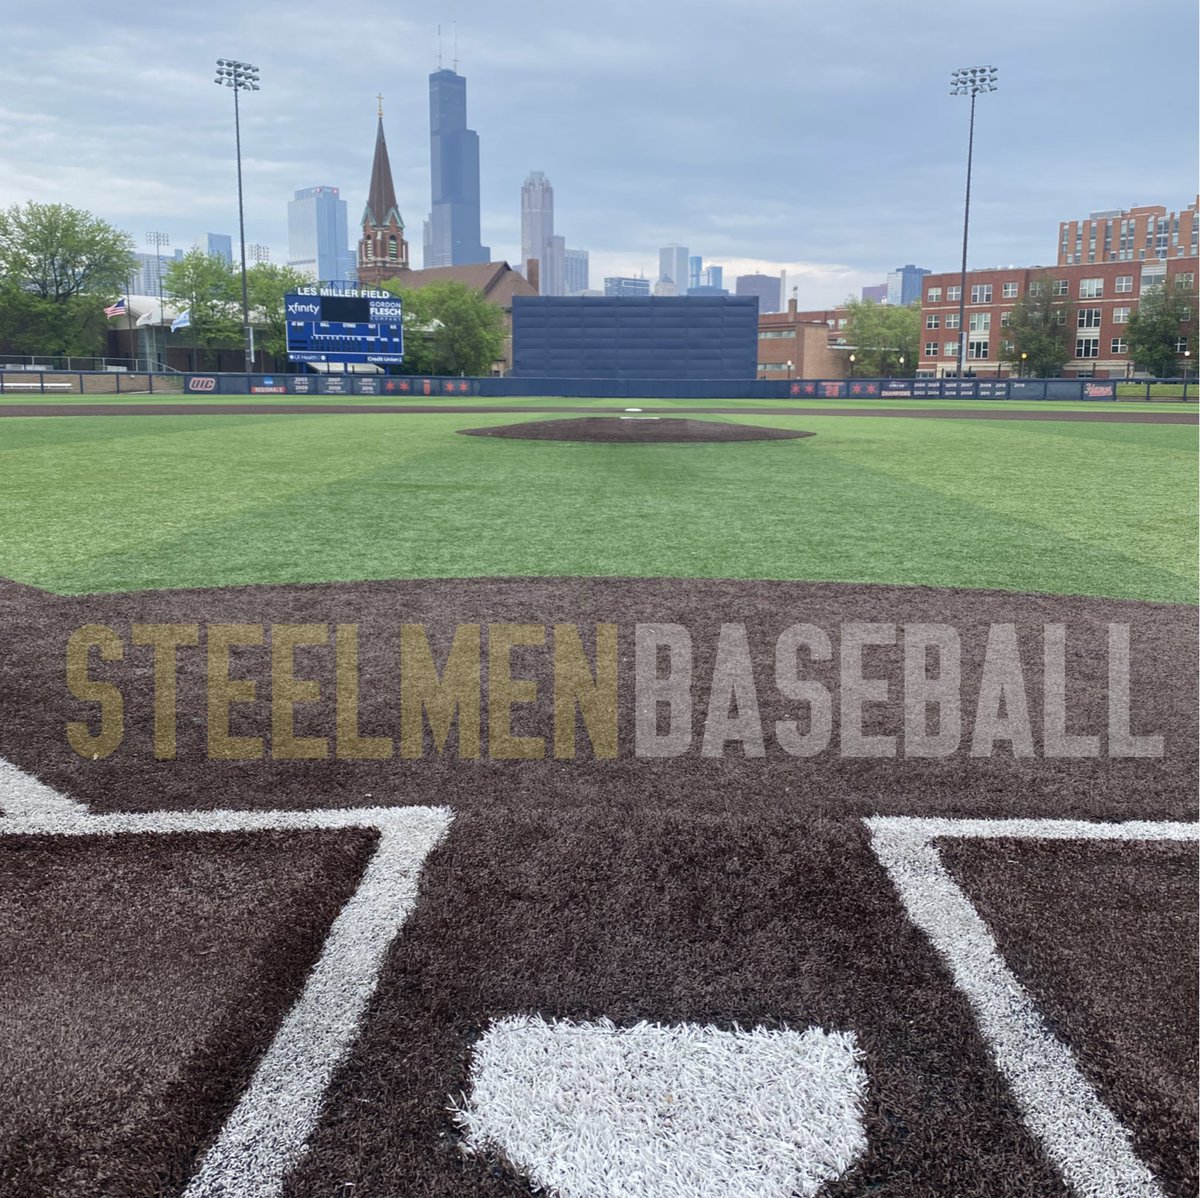 Hell of a view! Steelmen Baseball Tour makes a stop in Chicago